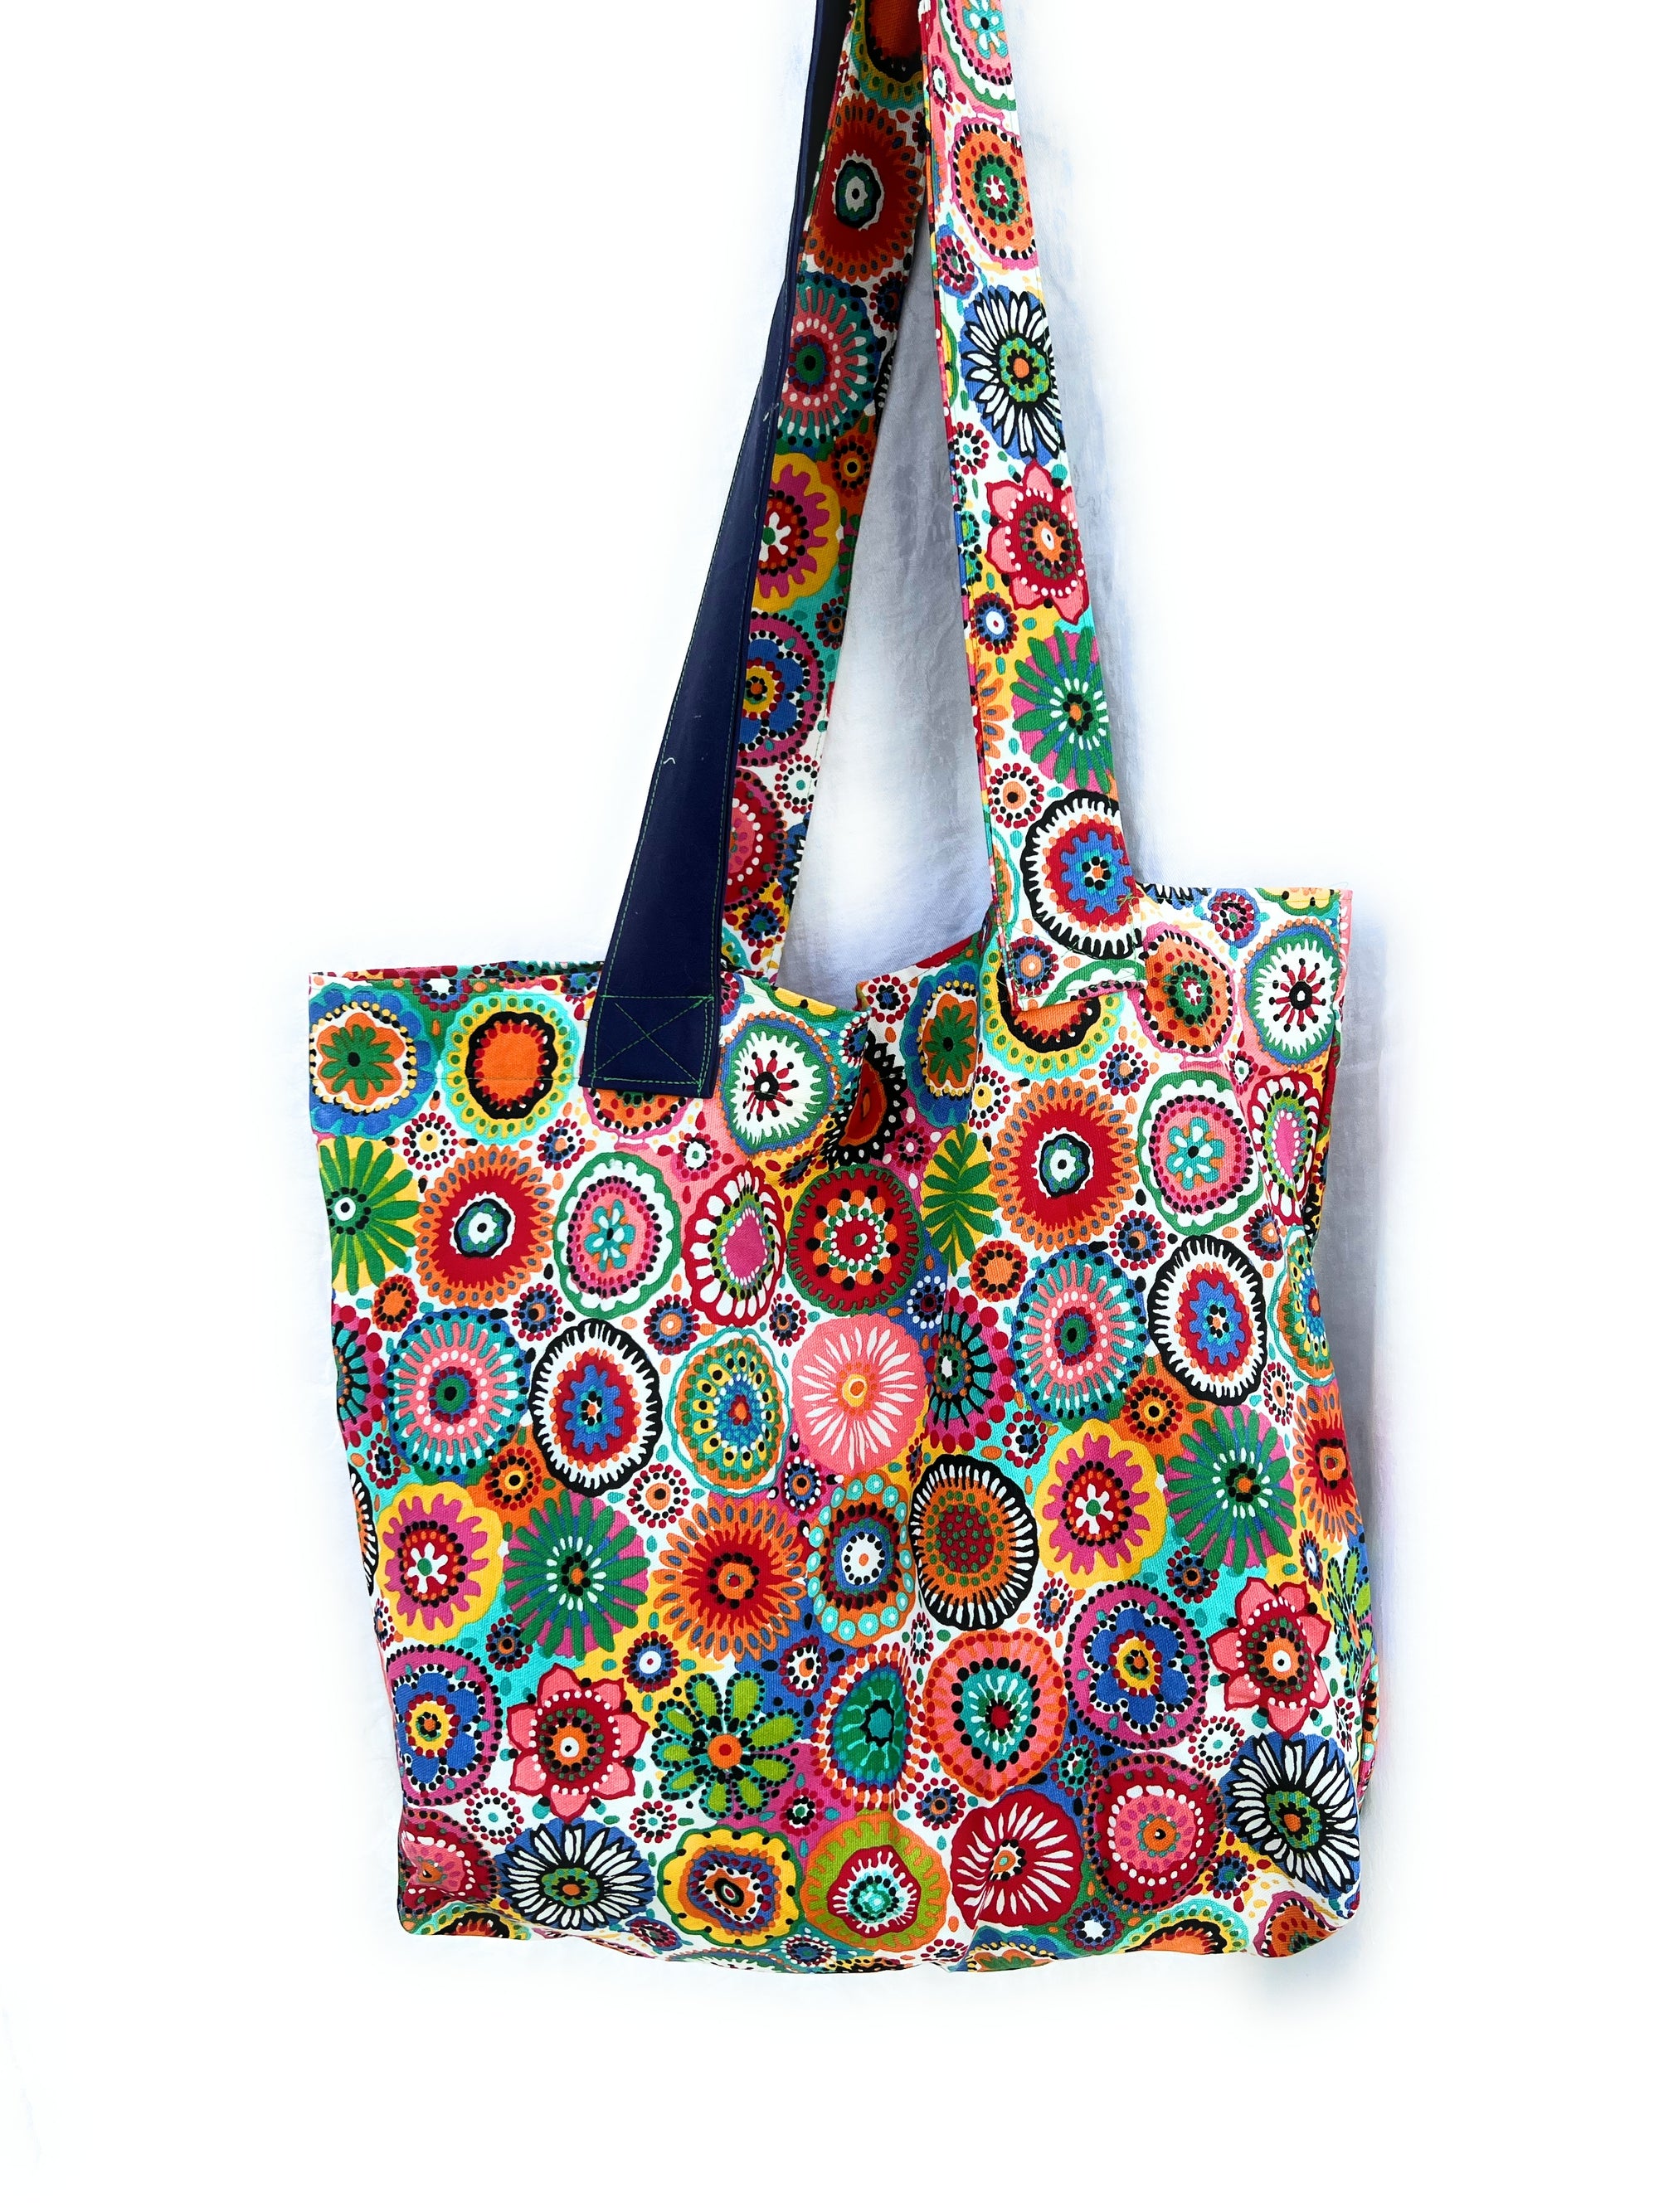 Grocery Market Tote Bag Bright Geometric Floral